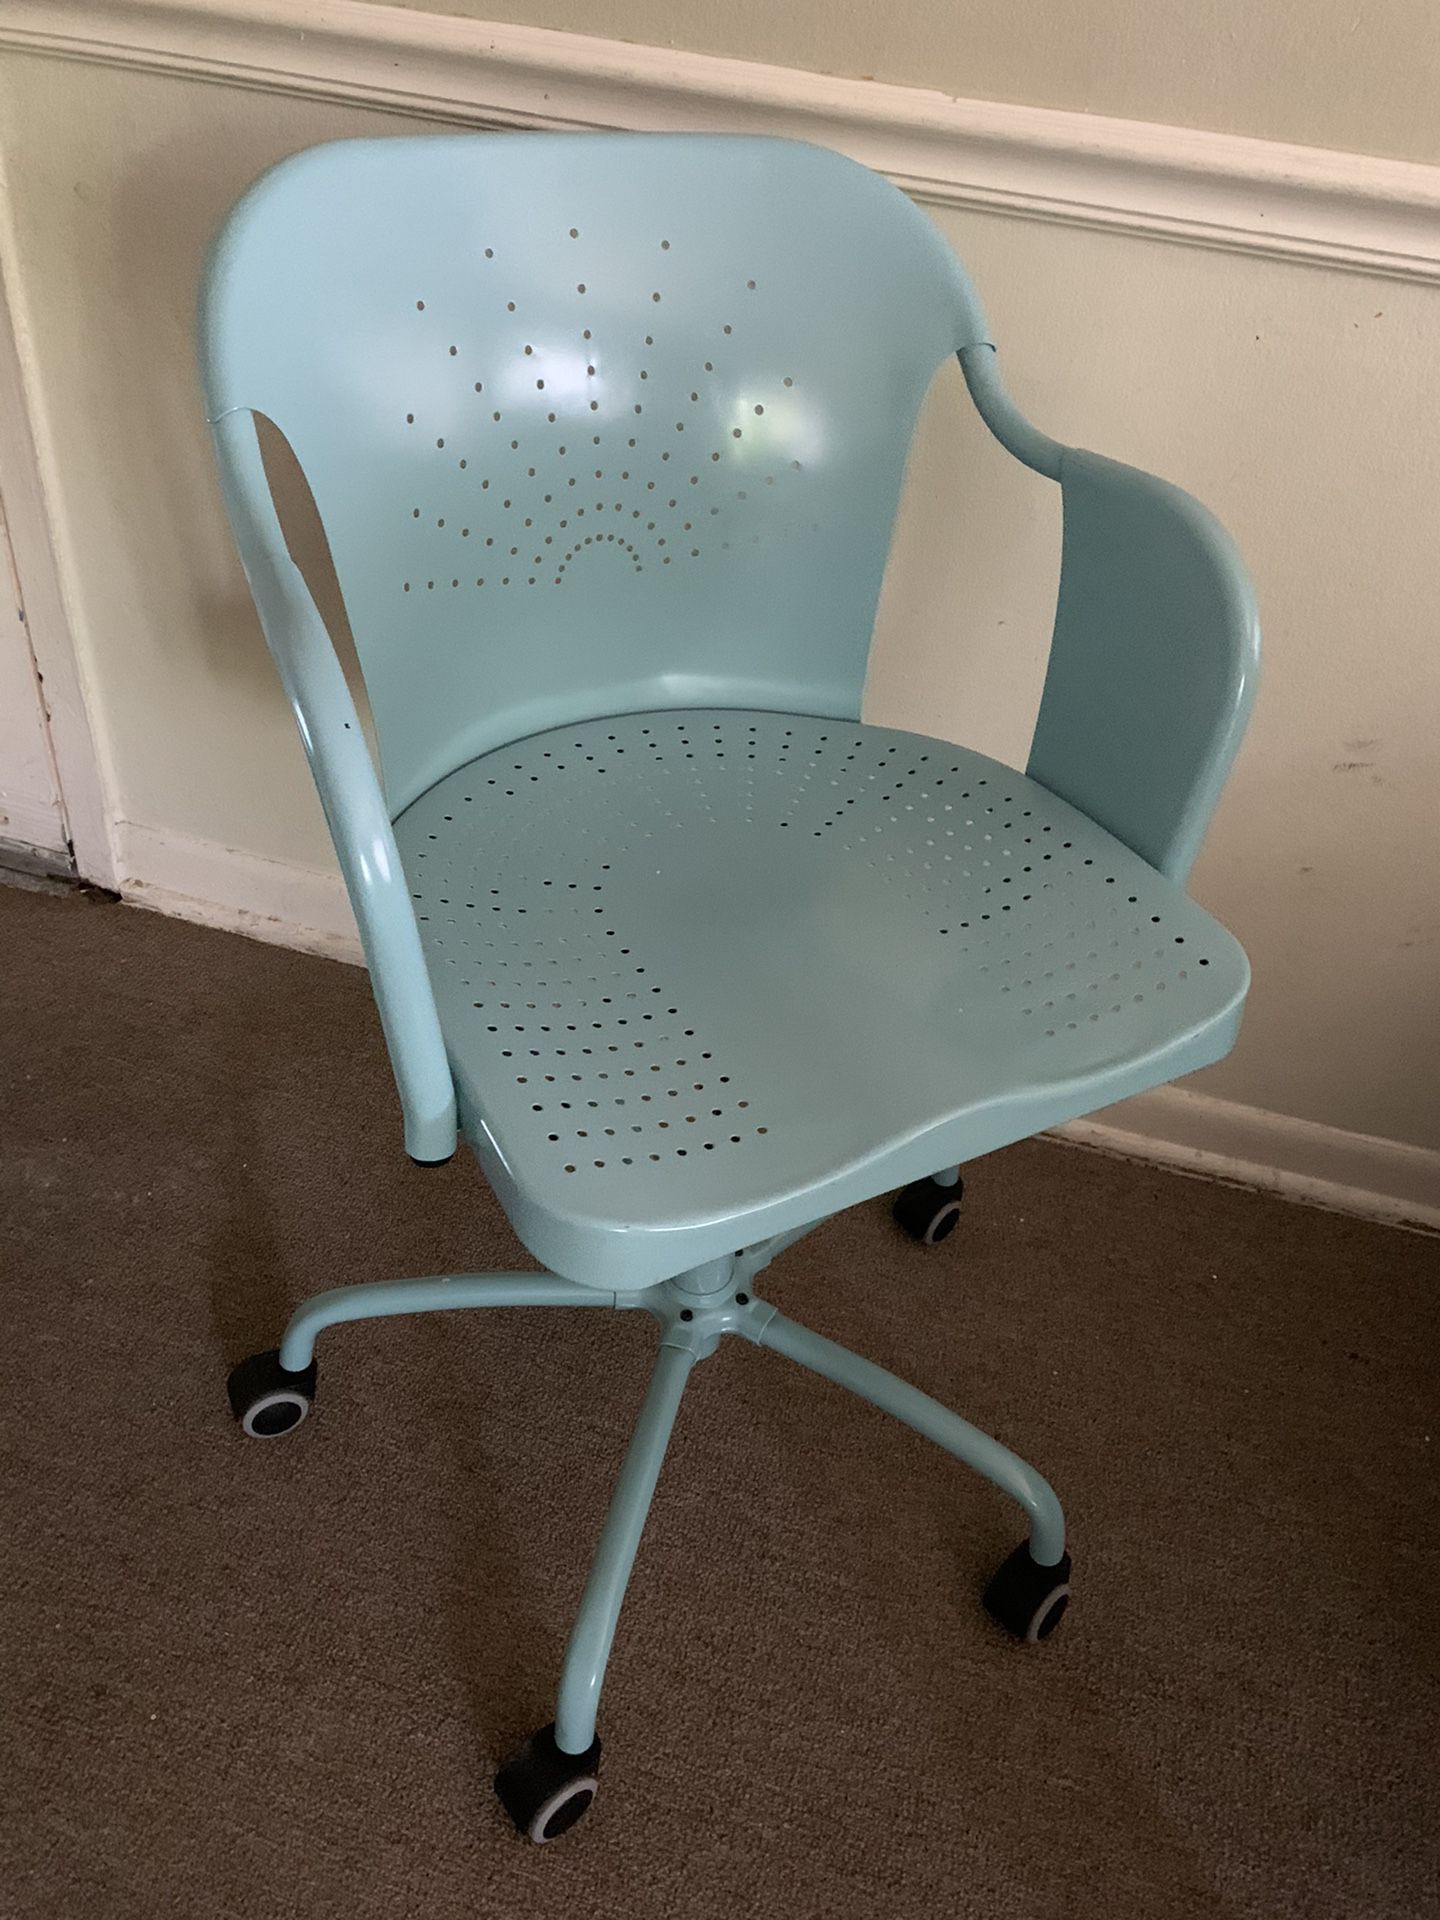 Chair for desks